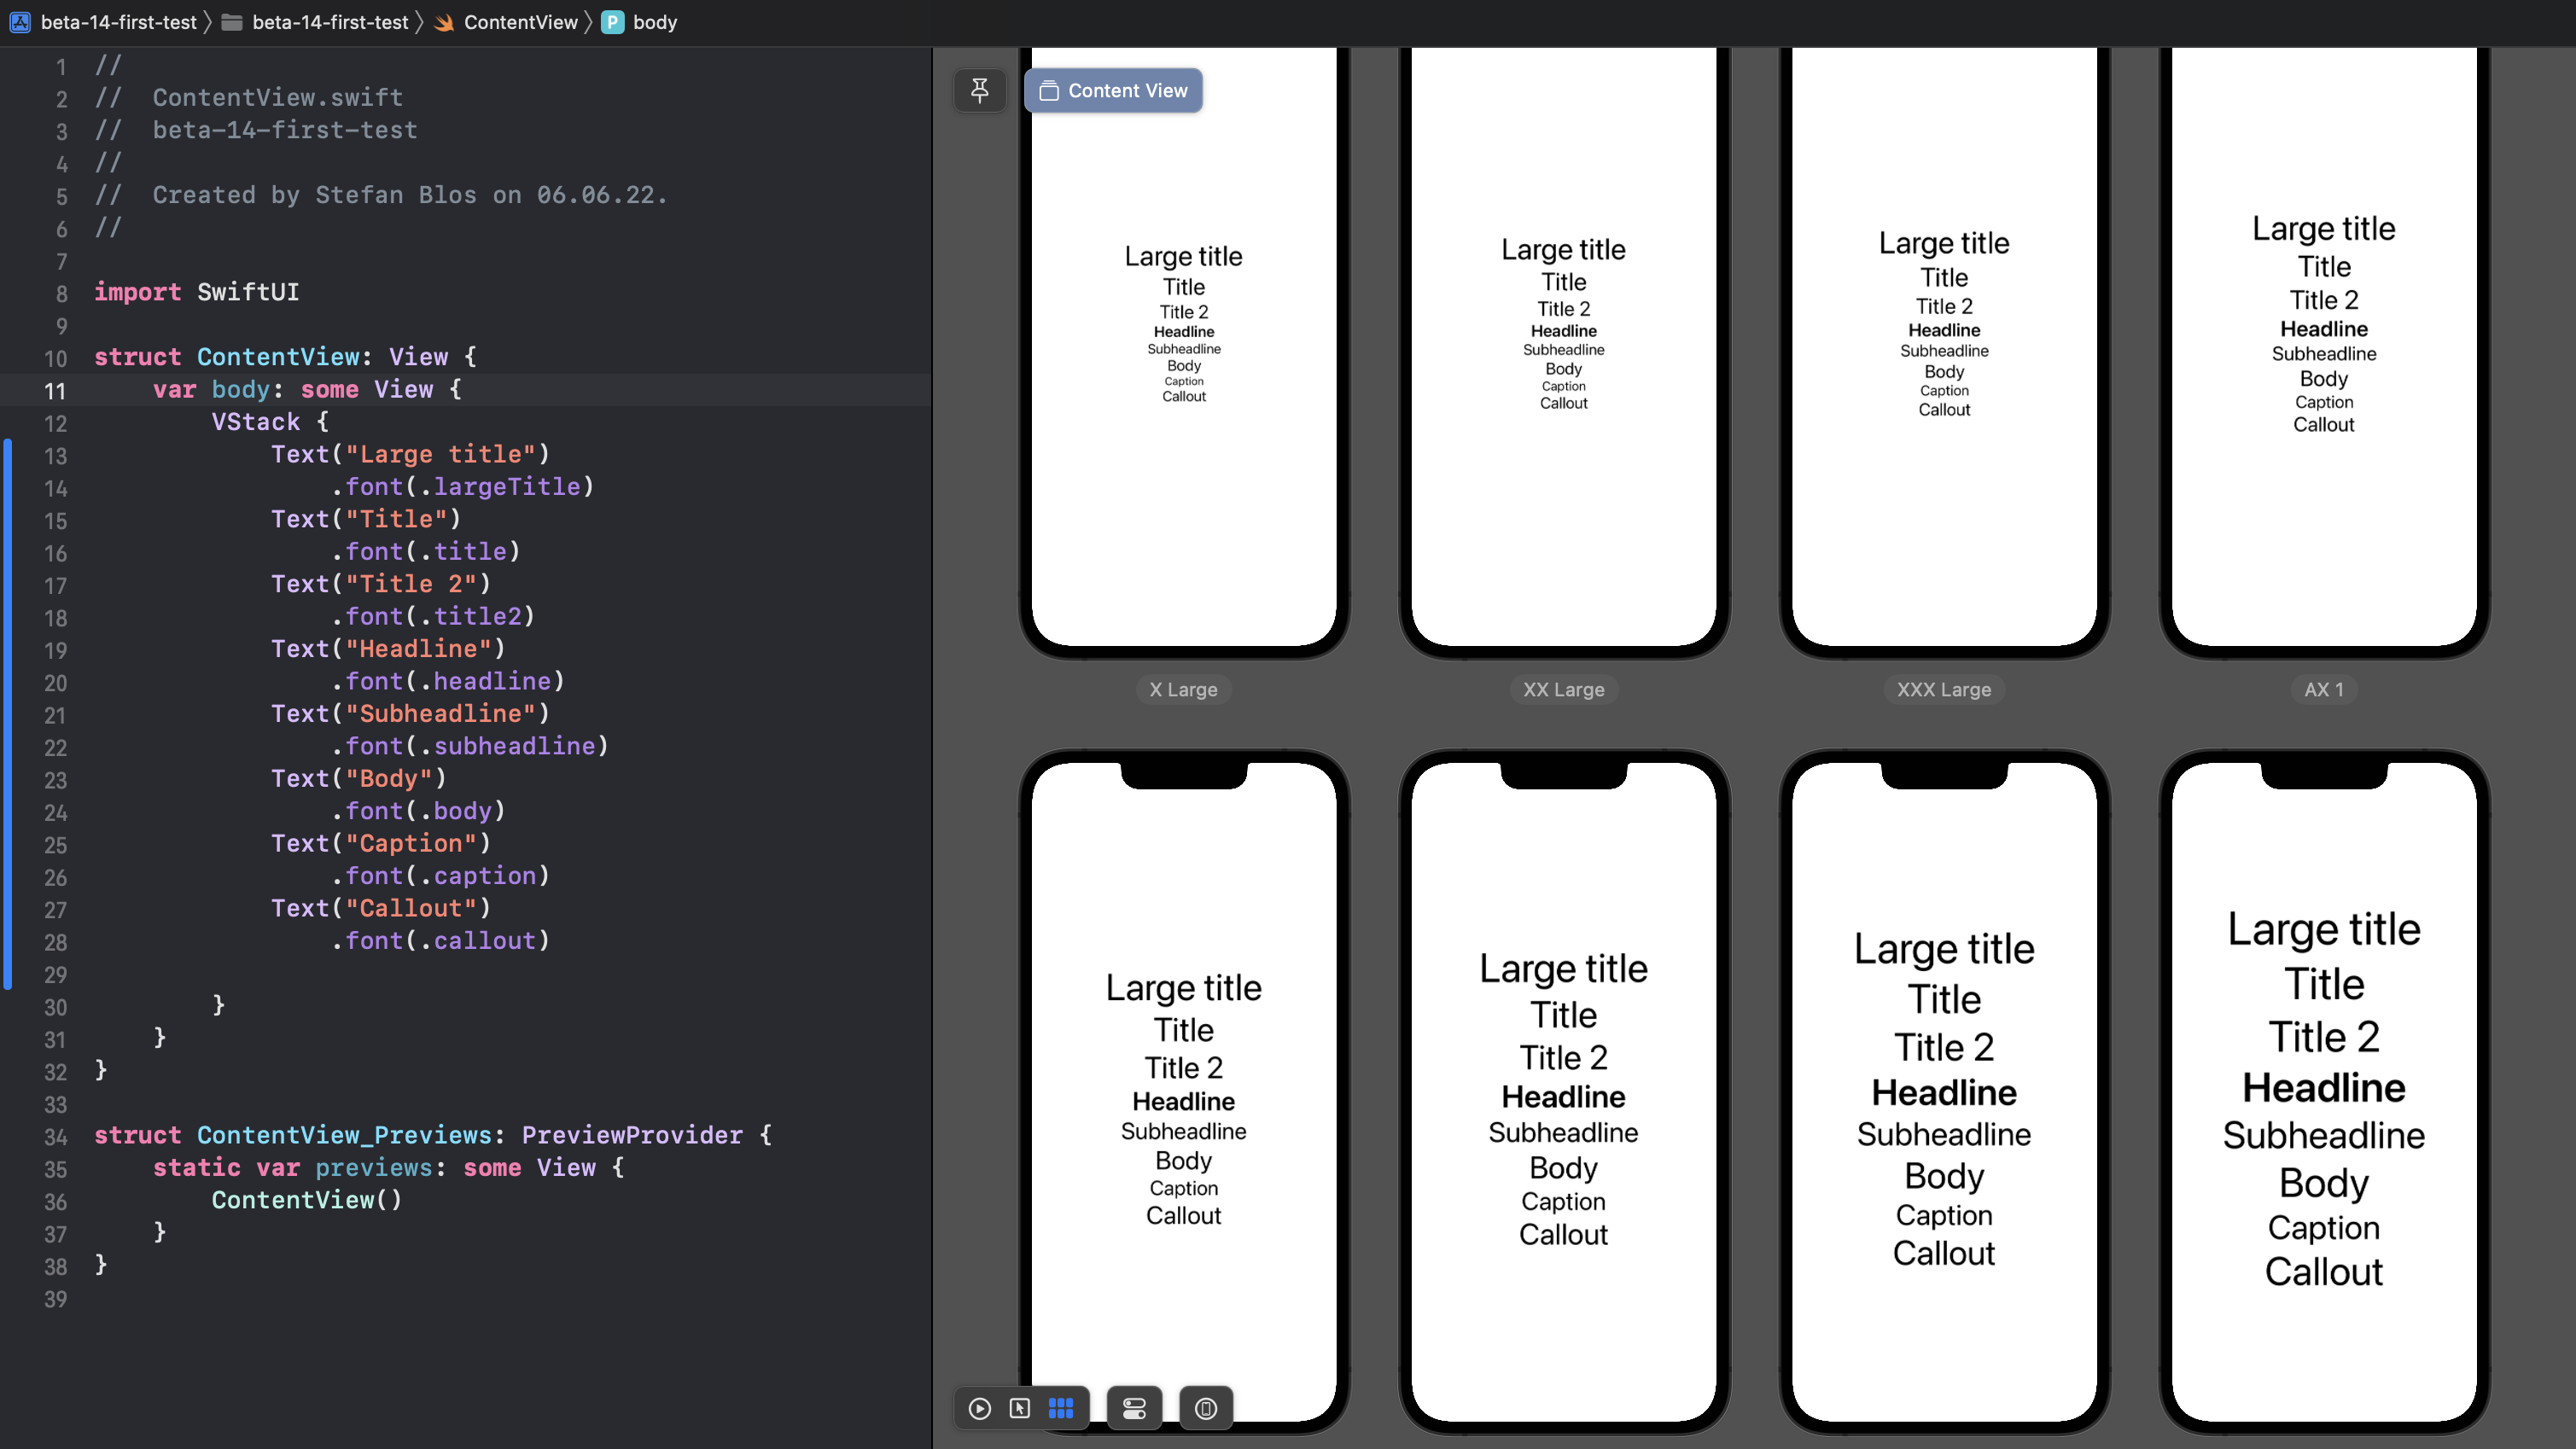 Seeing all options of dynamic type sizes side-by-side is great for optimizing our layouts.